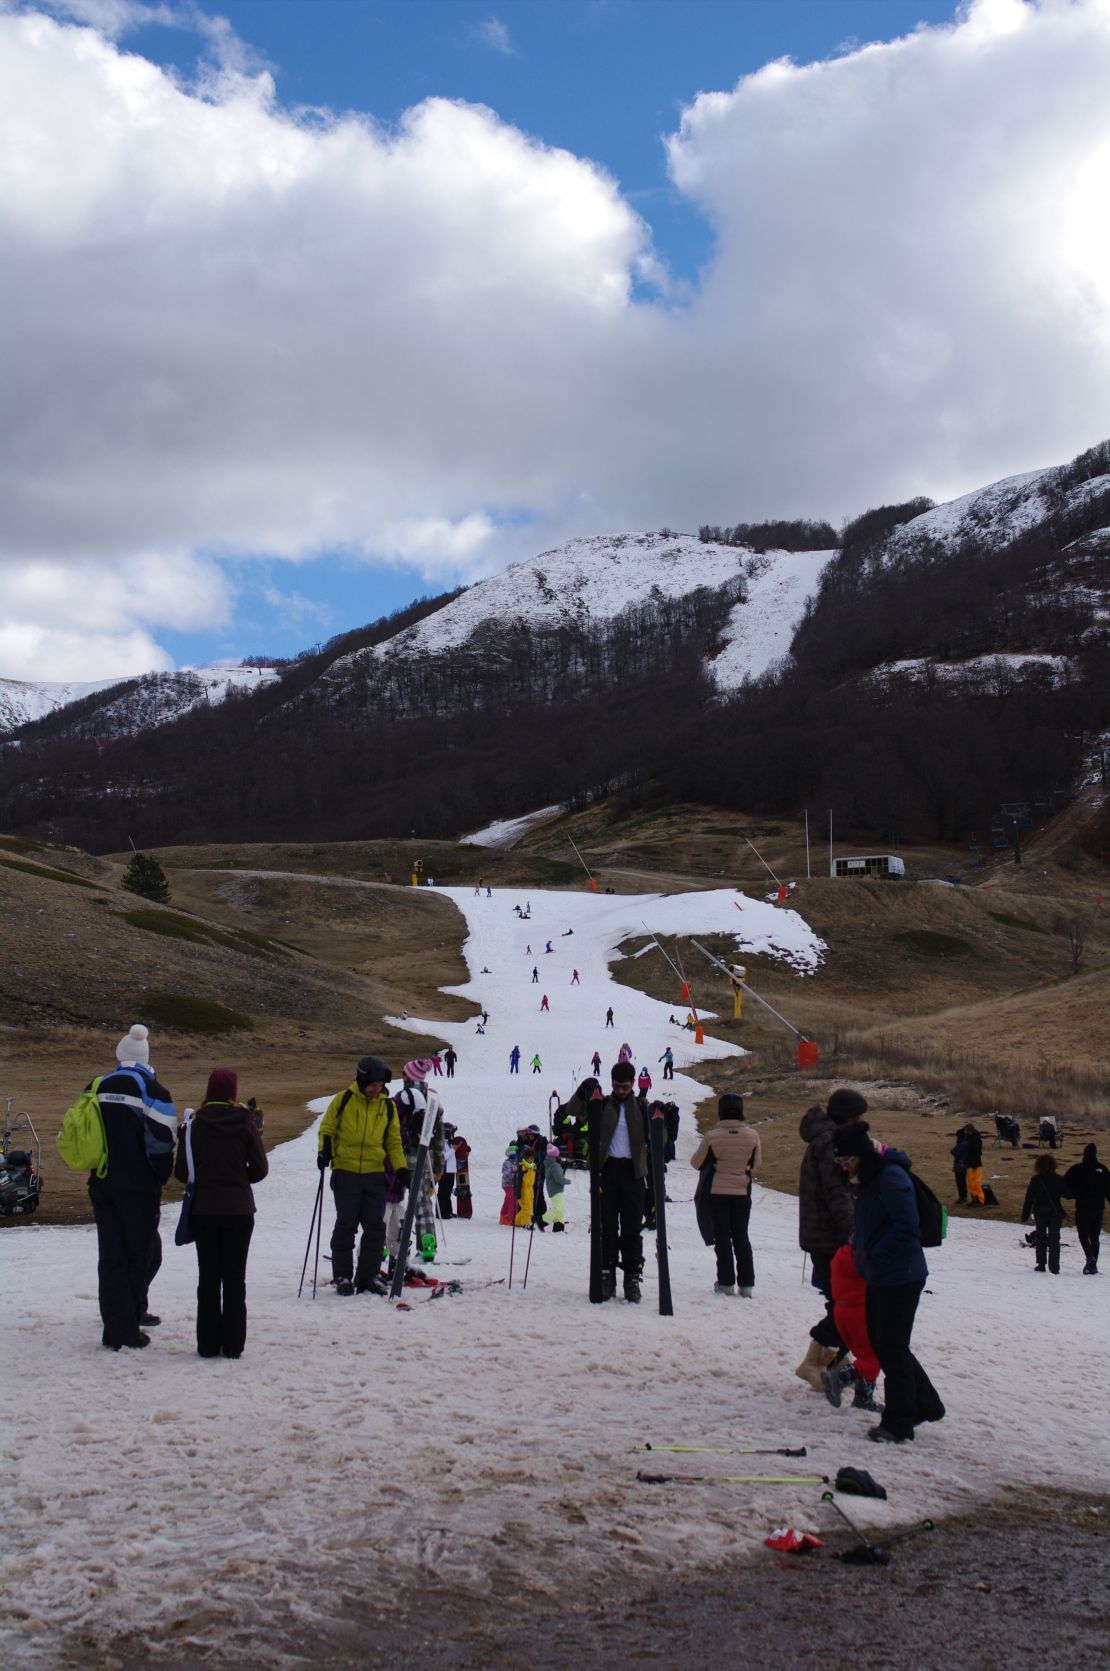 One of the four pistes made of artificial snow.